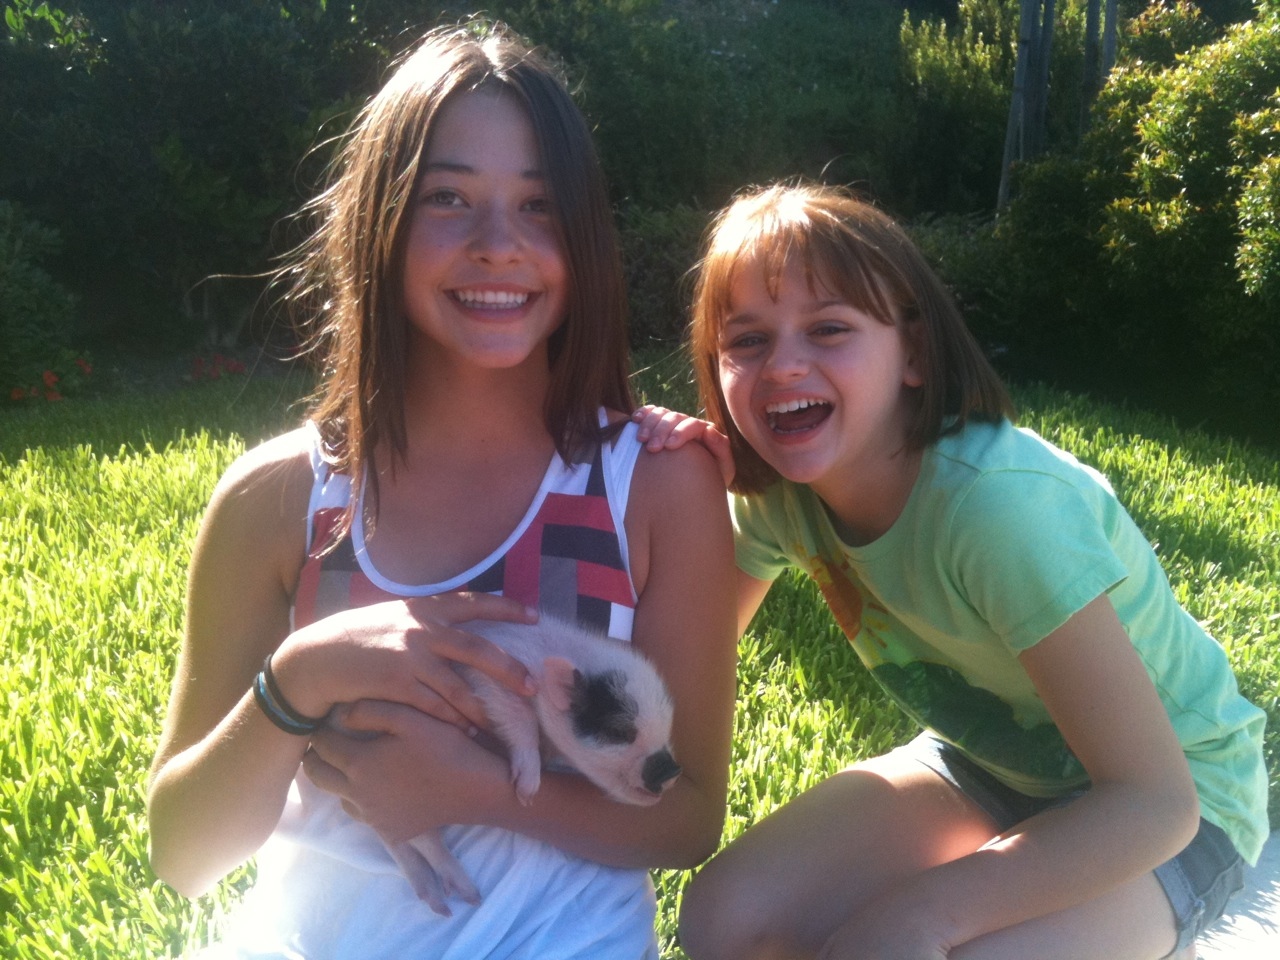 Chelsea Smith, Joey King and JJ the pig (a birthday present to Joey from Jay Leno).